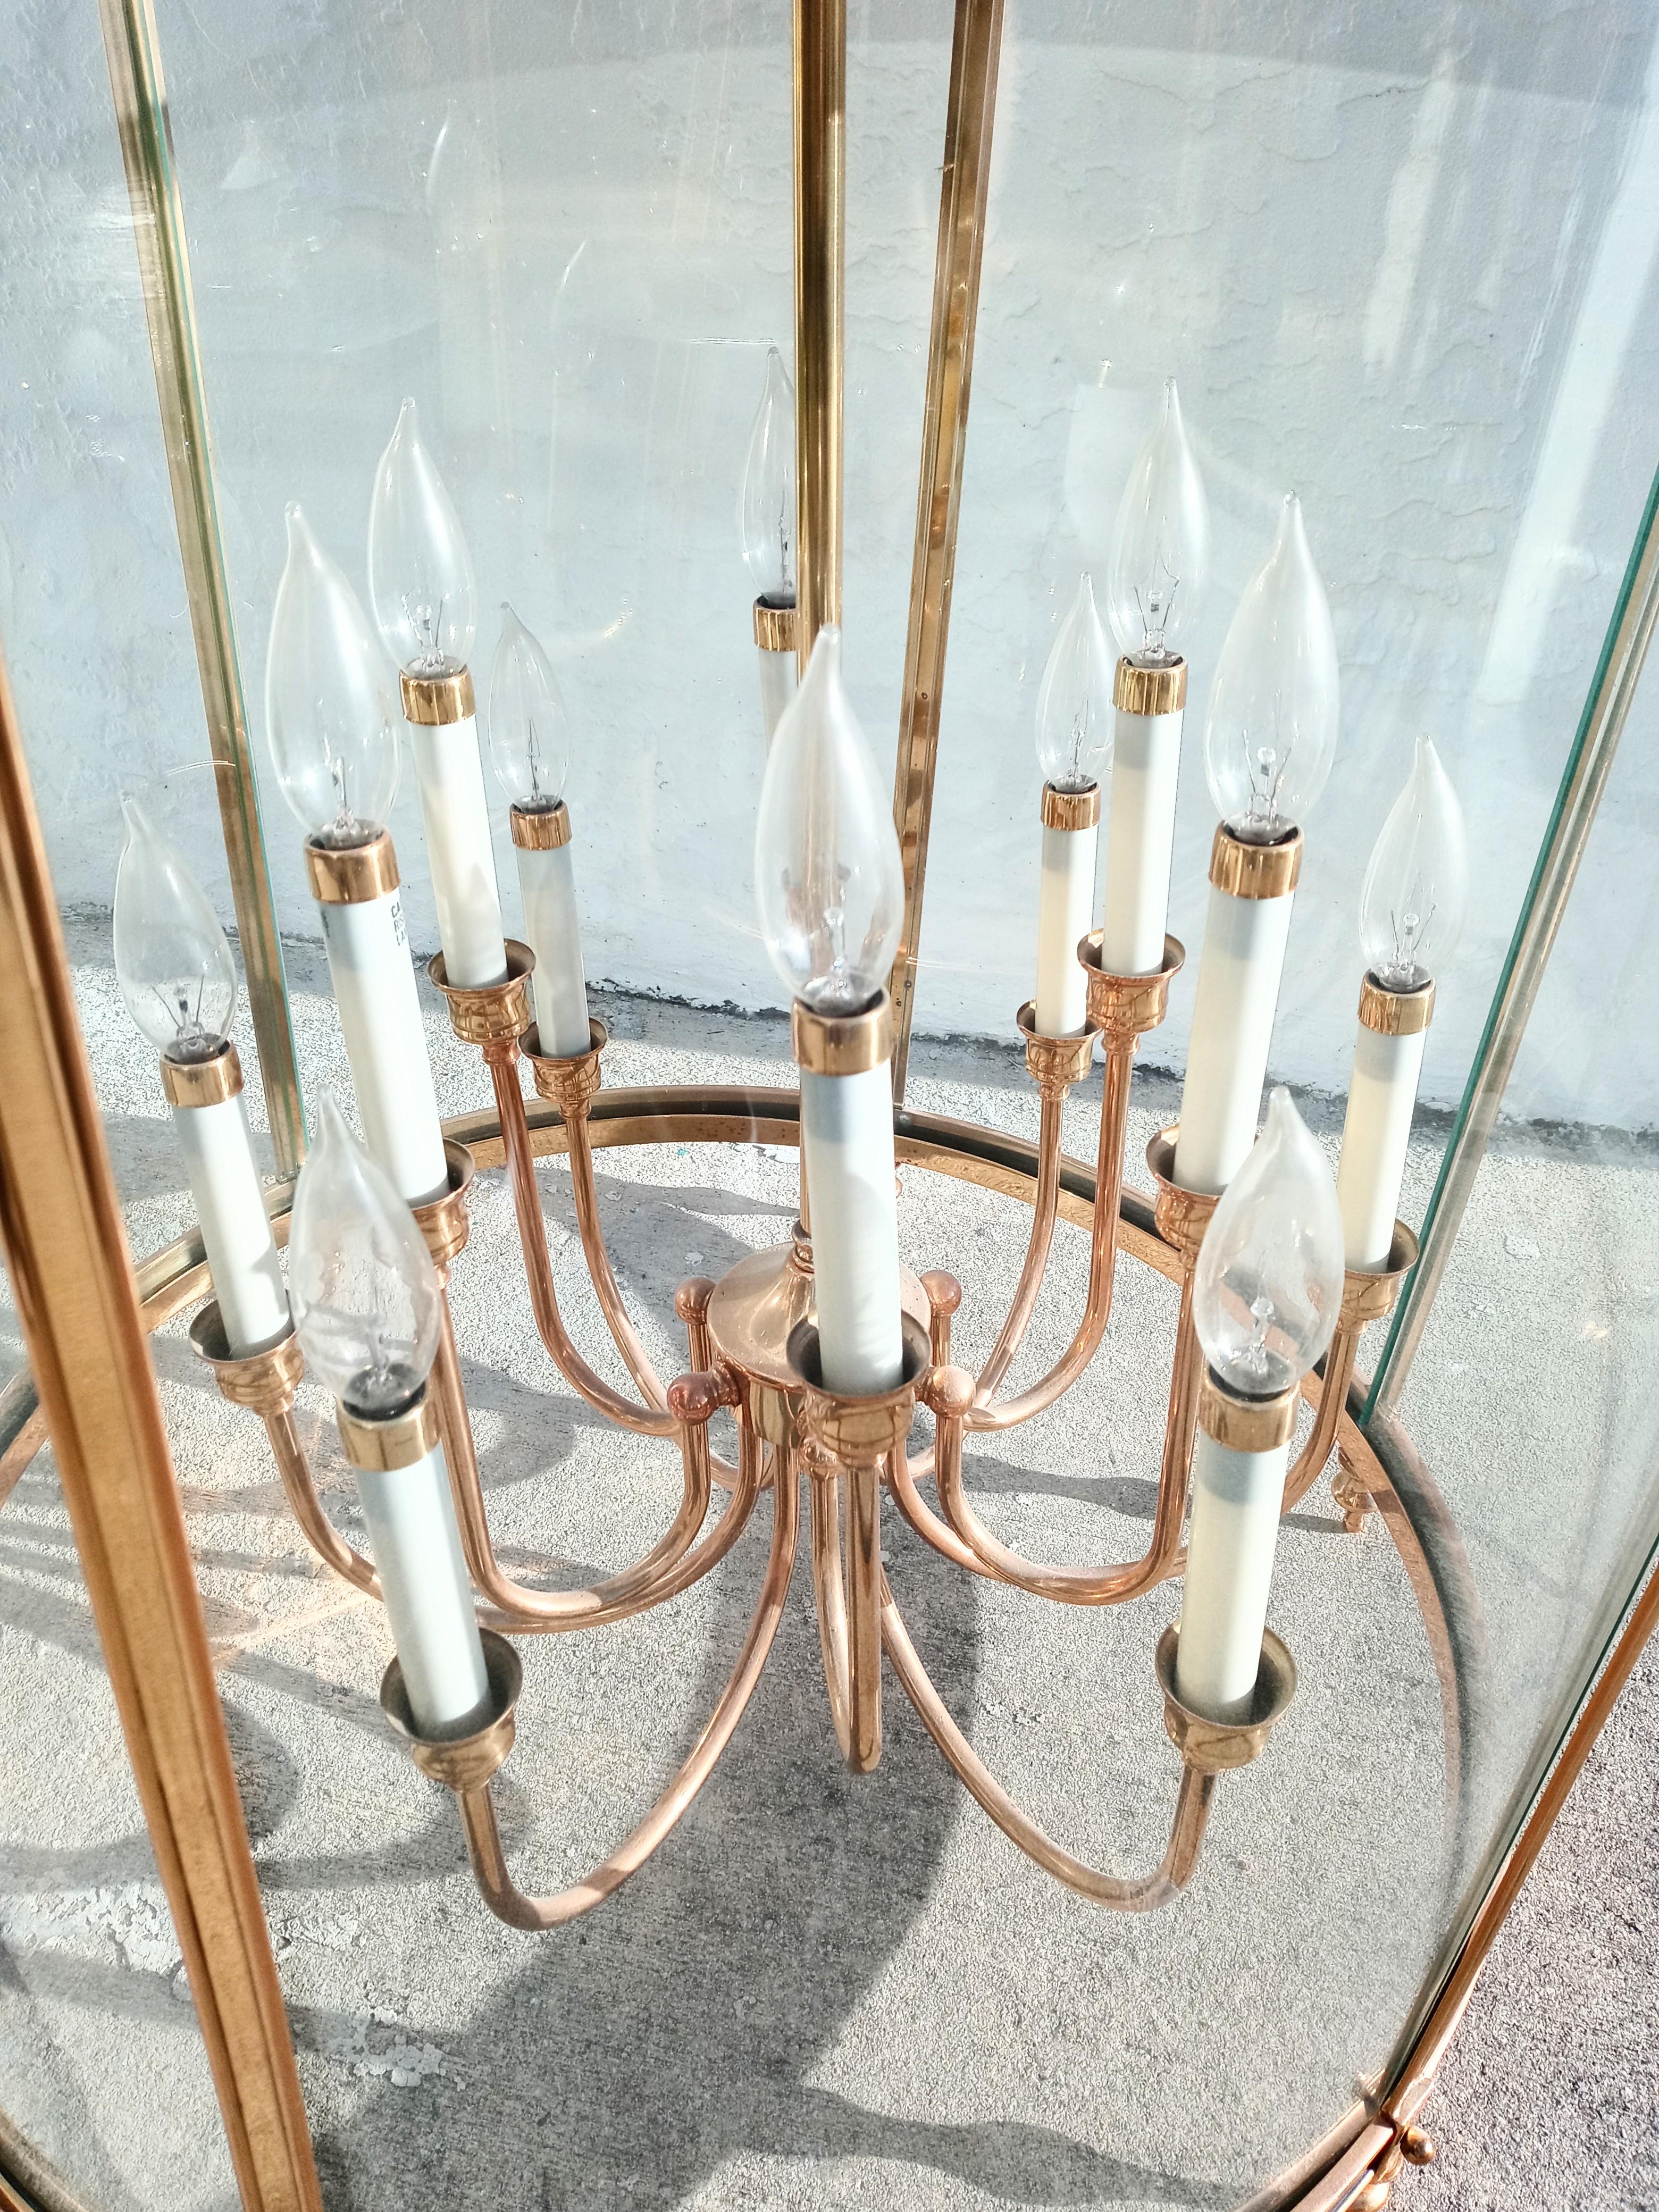 Late 20th Century Monumental Traditional Brass Curved Glass 12 Light Foyer Cylindrical Chandelier For Sale